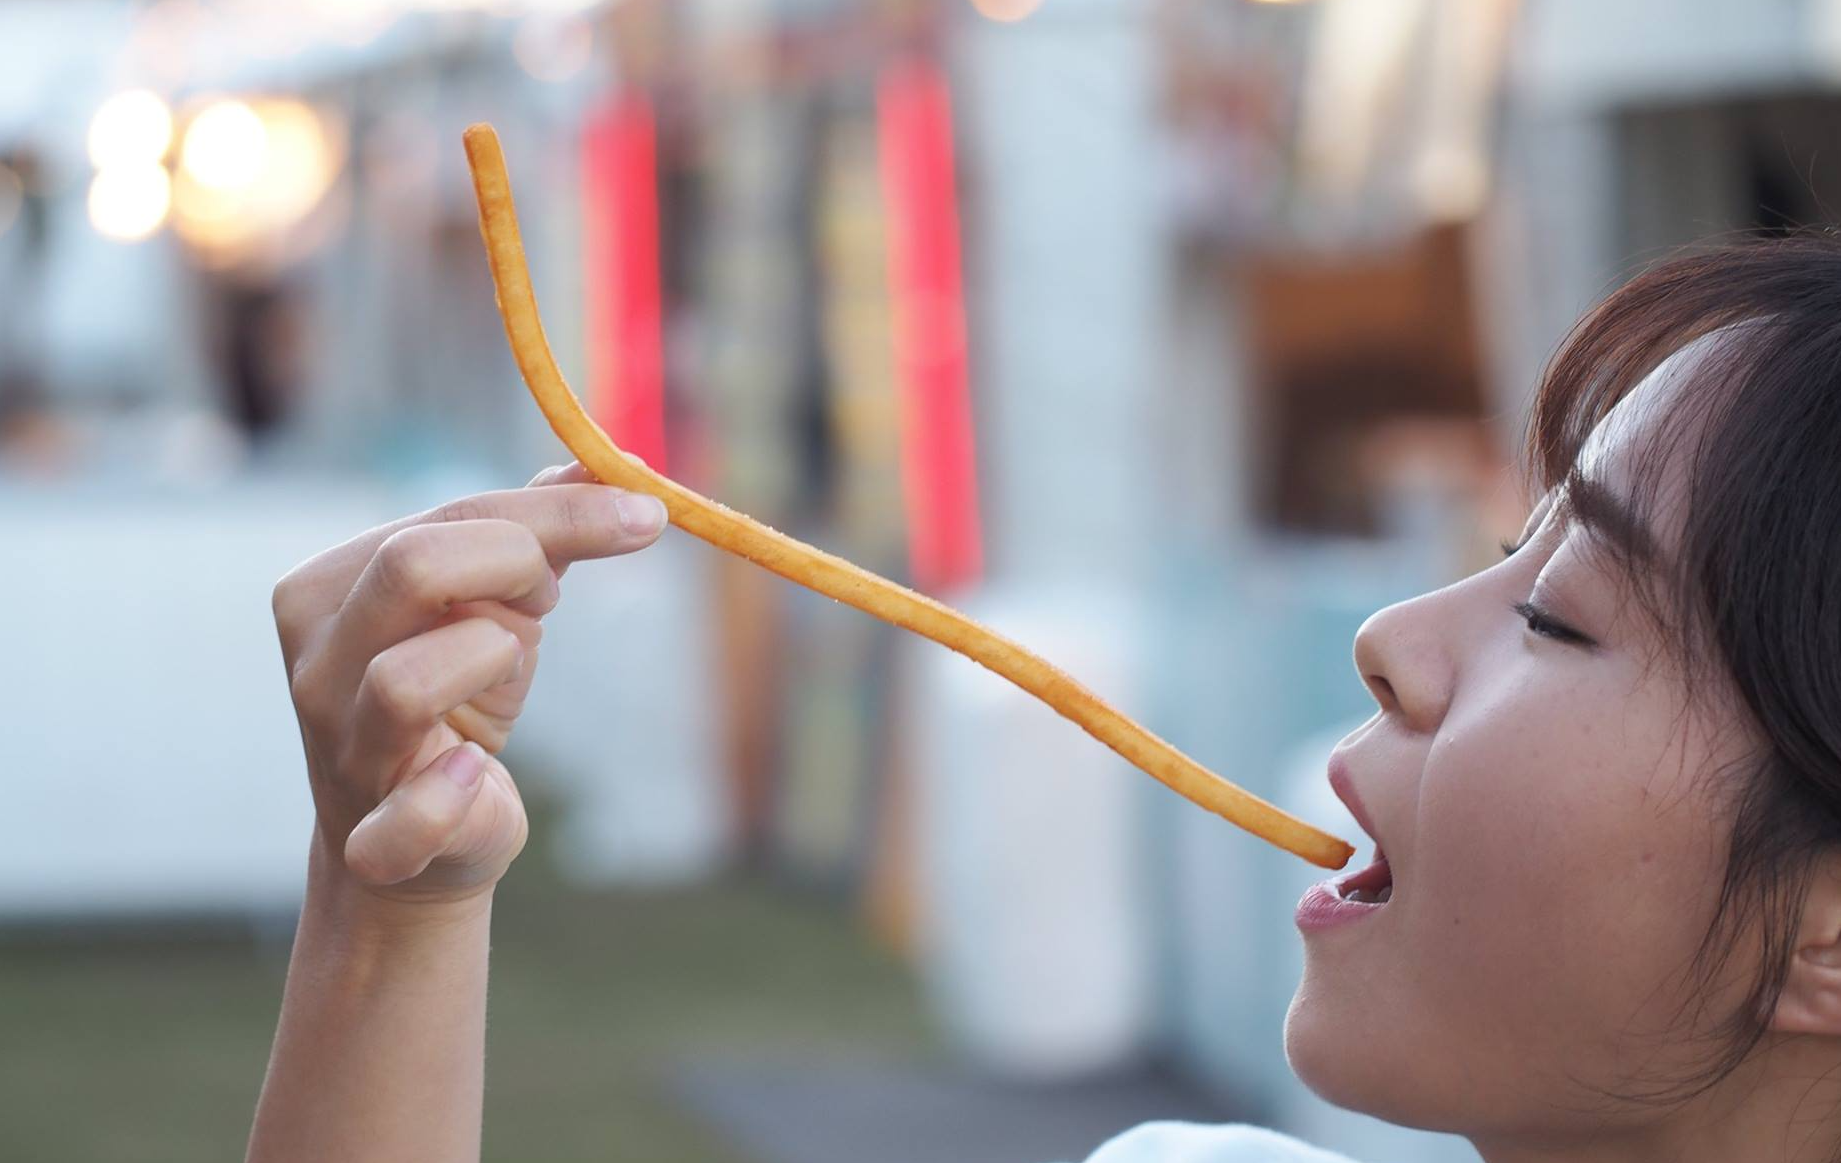 Japan’s Foot-Long Fries Arrive In Australia For You Starch-Crossed Lovers